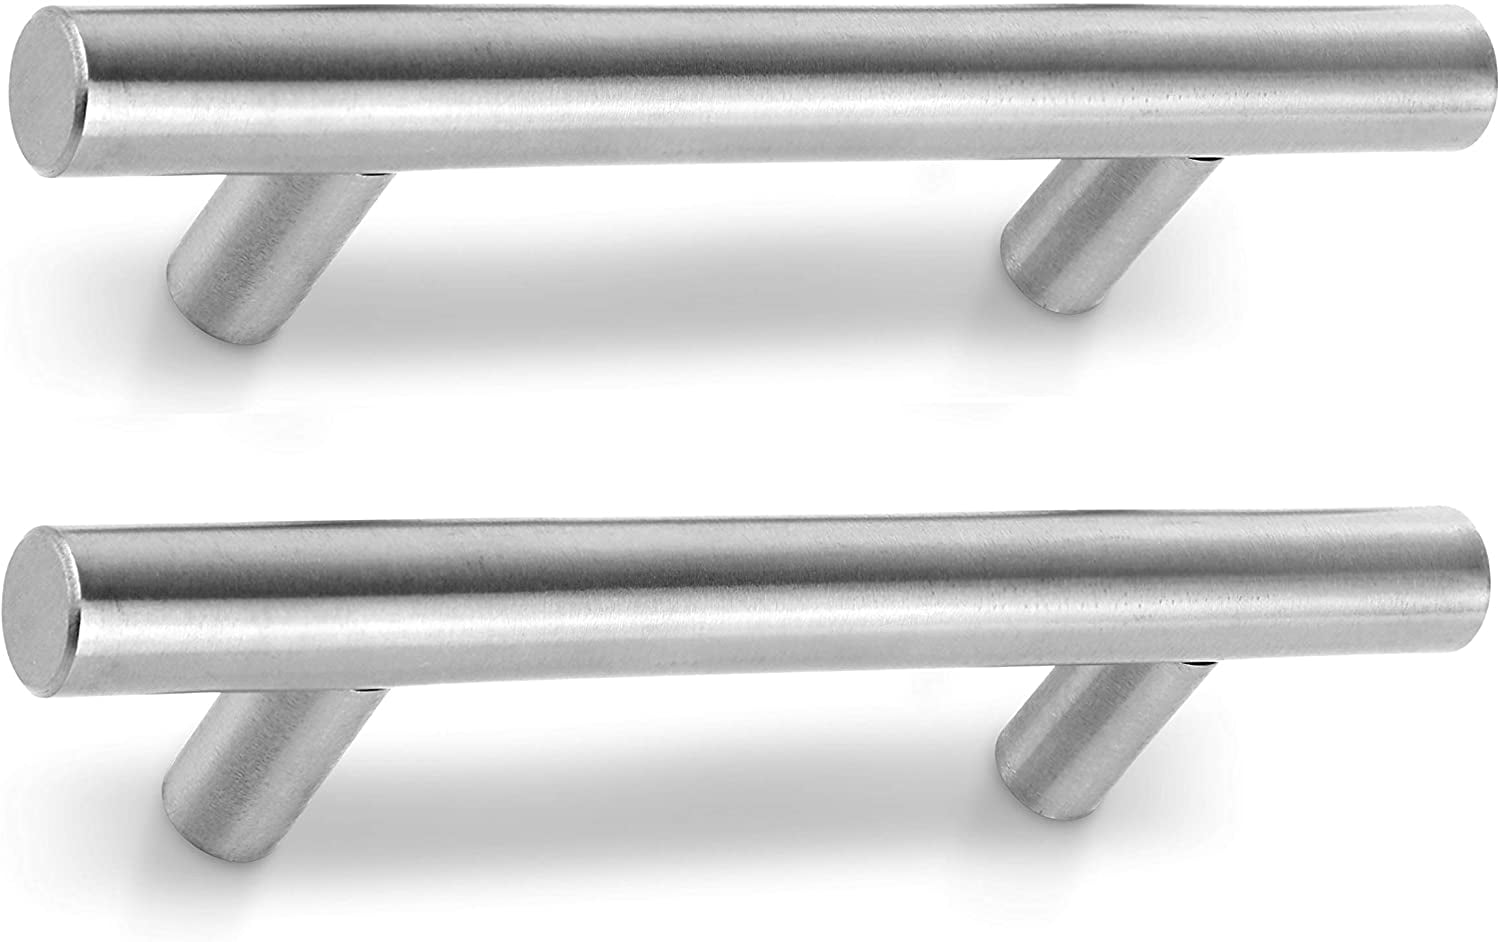 5 Inch Stainless Steel Cabinet Pulls